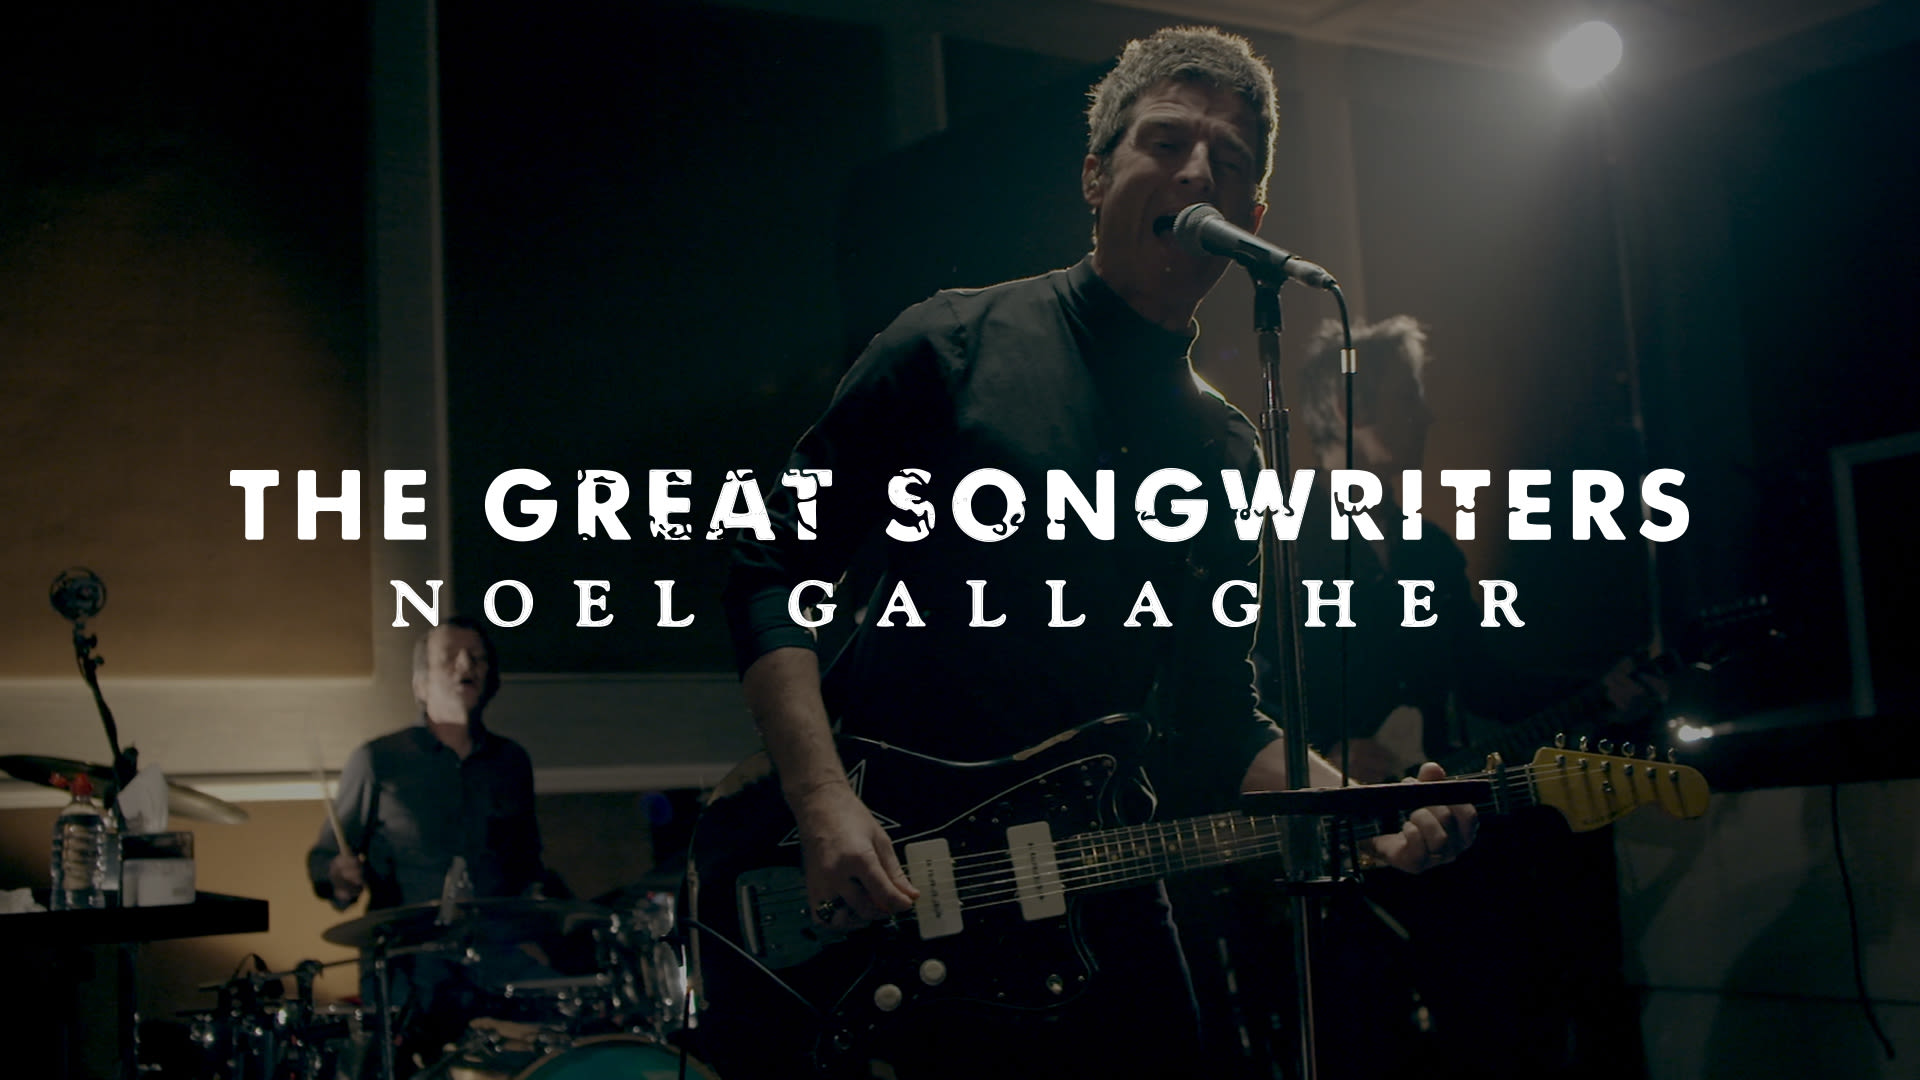 Noel Gallagher - The Great Songwriters